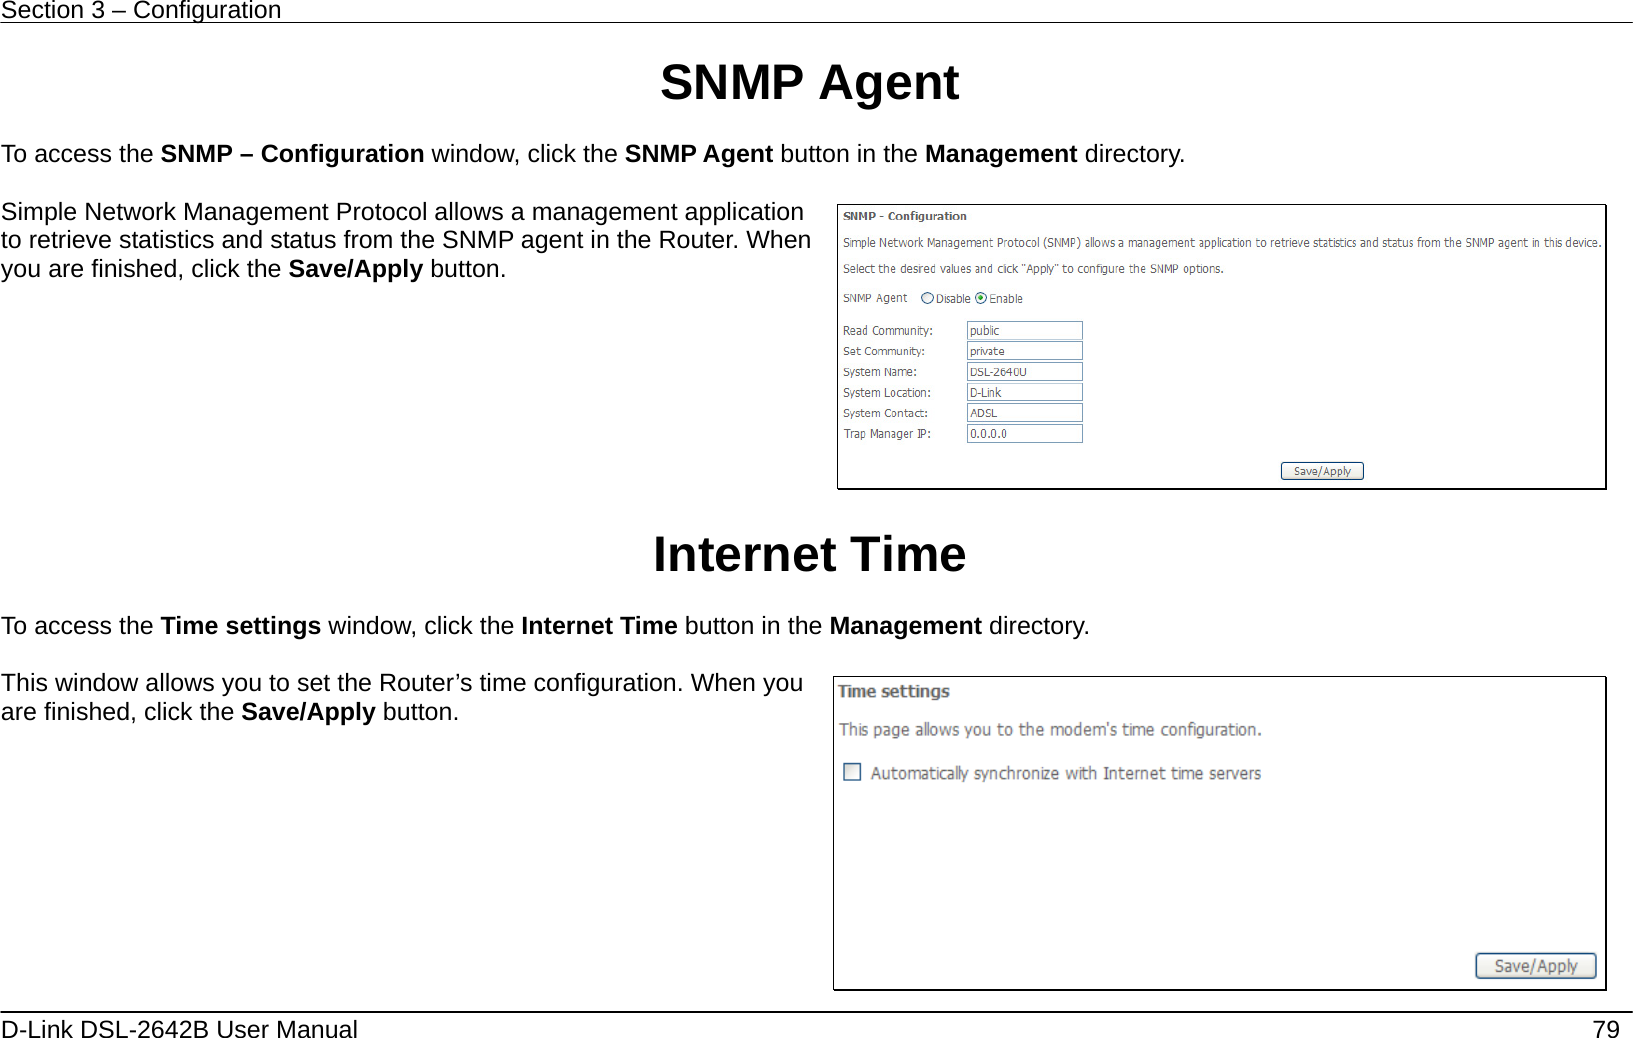 Section 3 – Configuration   D-Link DSL-2642B User Manual    79 SNMP Agent ton in the Management directory.  agent in the Router. When ou are finished, click the Save/Apply button.   To access the SNMP – Configuration window, click the SNMP Agent but Simple Network Management Protocol allows a management application o retrieve statistics and status from the SNMPty    e Management directory.  time configuration. When you are finished, click the Save/Apply button.   Internet Time  To access the Time settings window, click the Internet Time button in th This window allows you to set the Router’s 